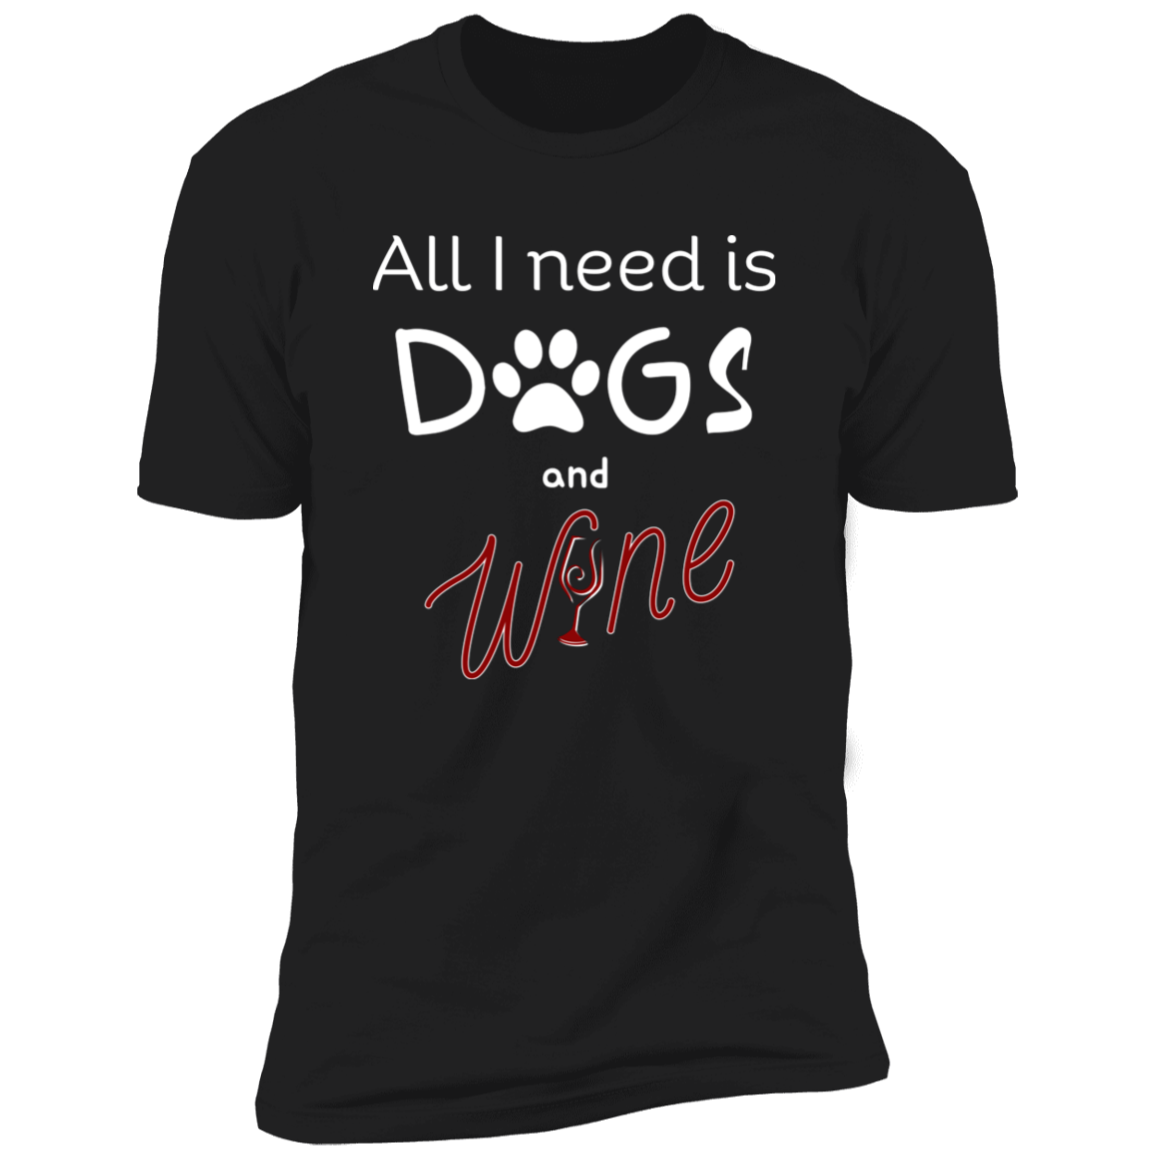 All I Need is Dogs and Wine T-shirt, Dog Shirt for humans, in black